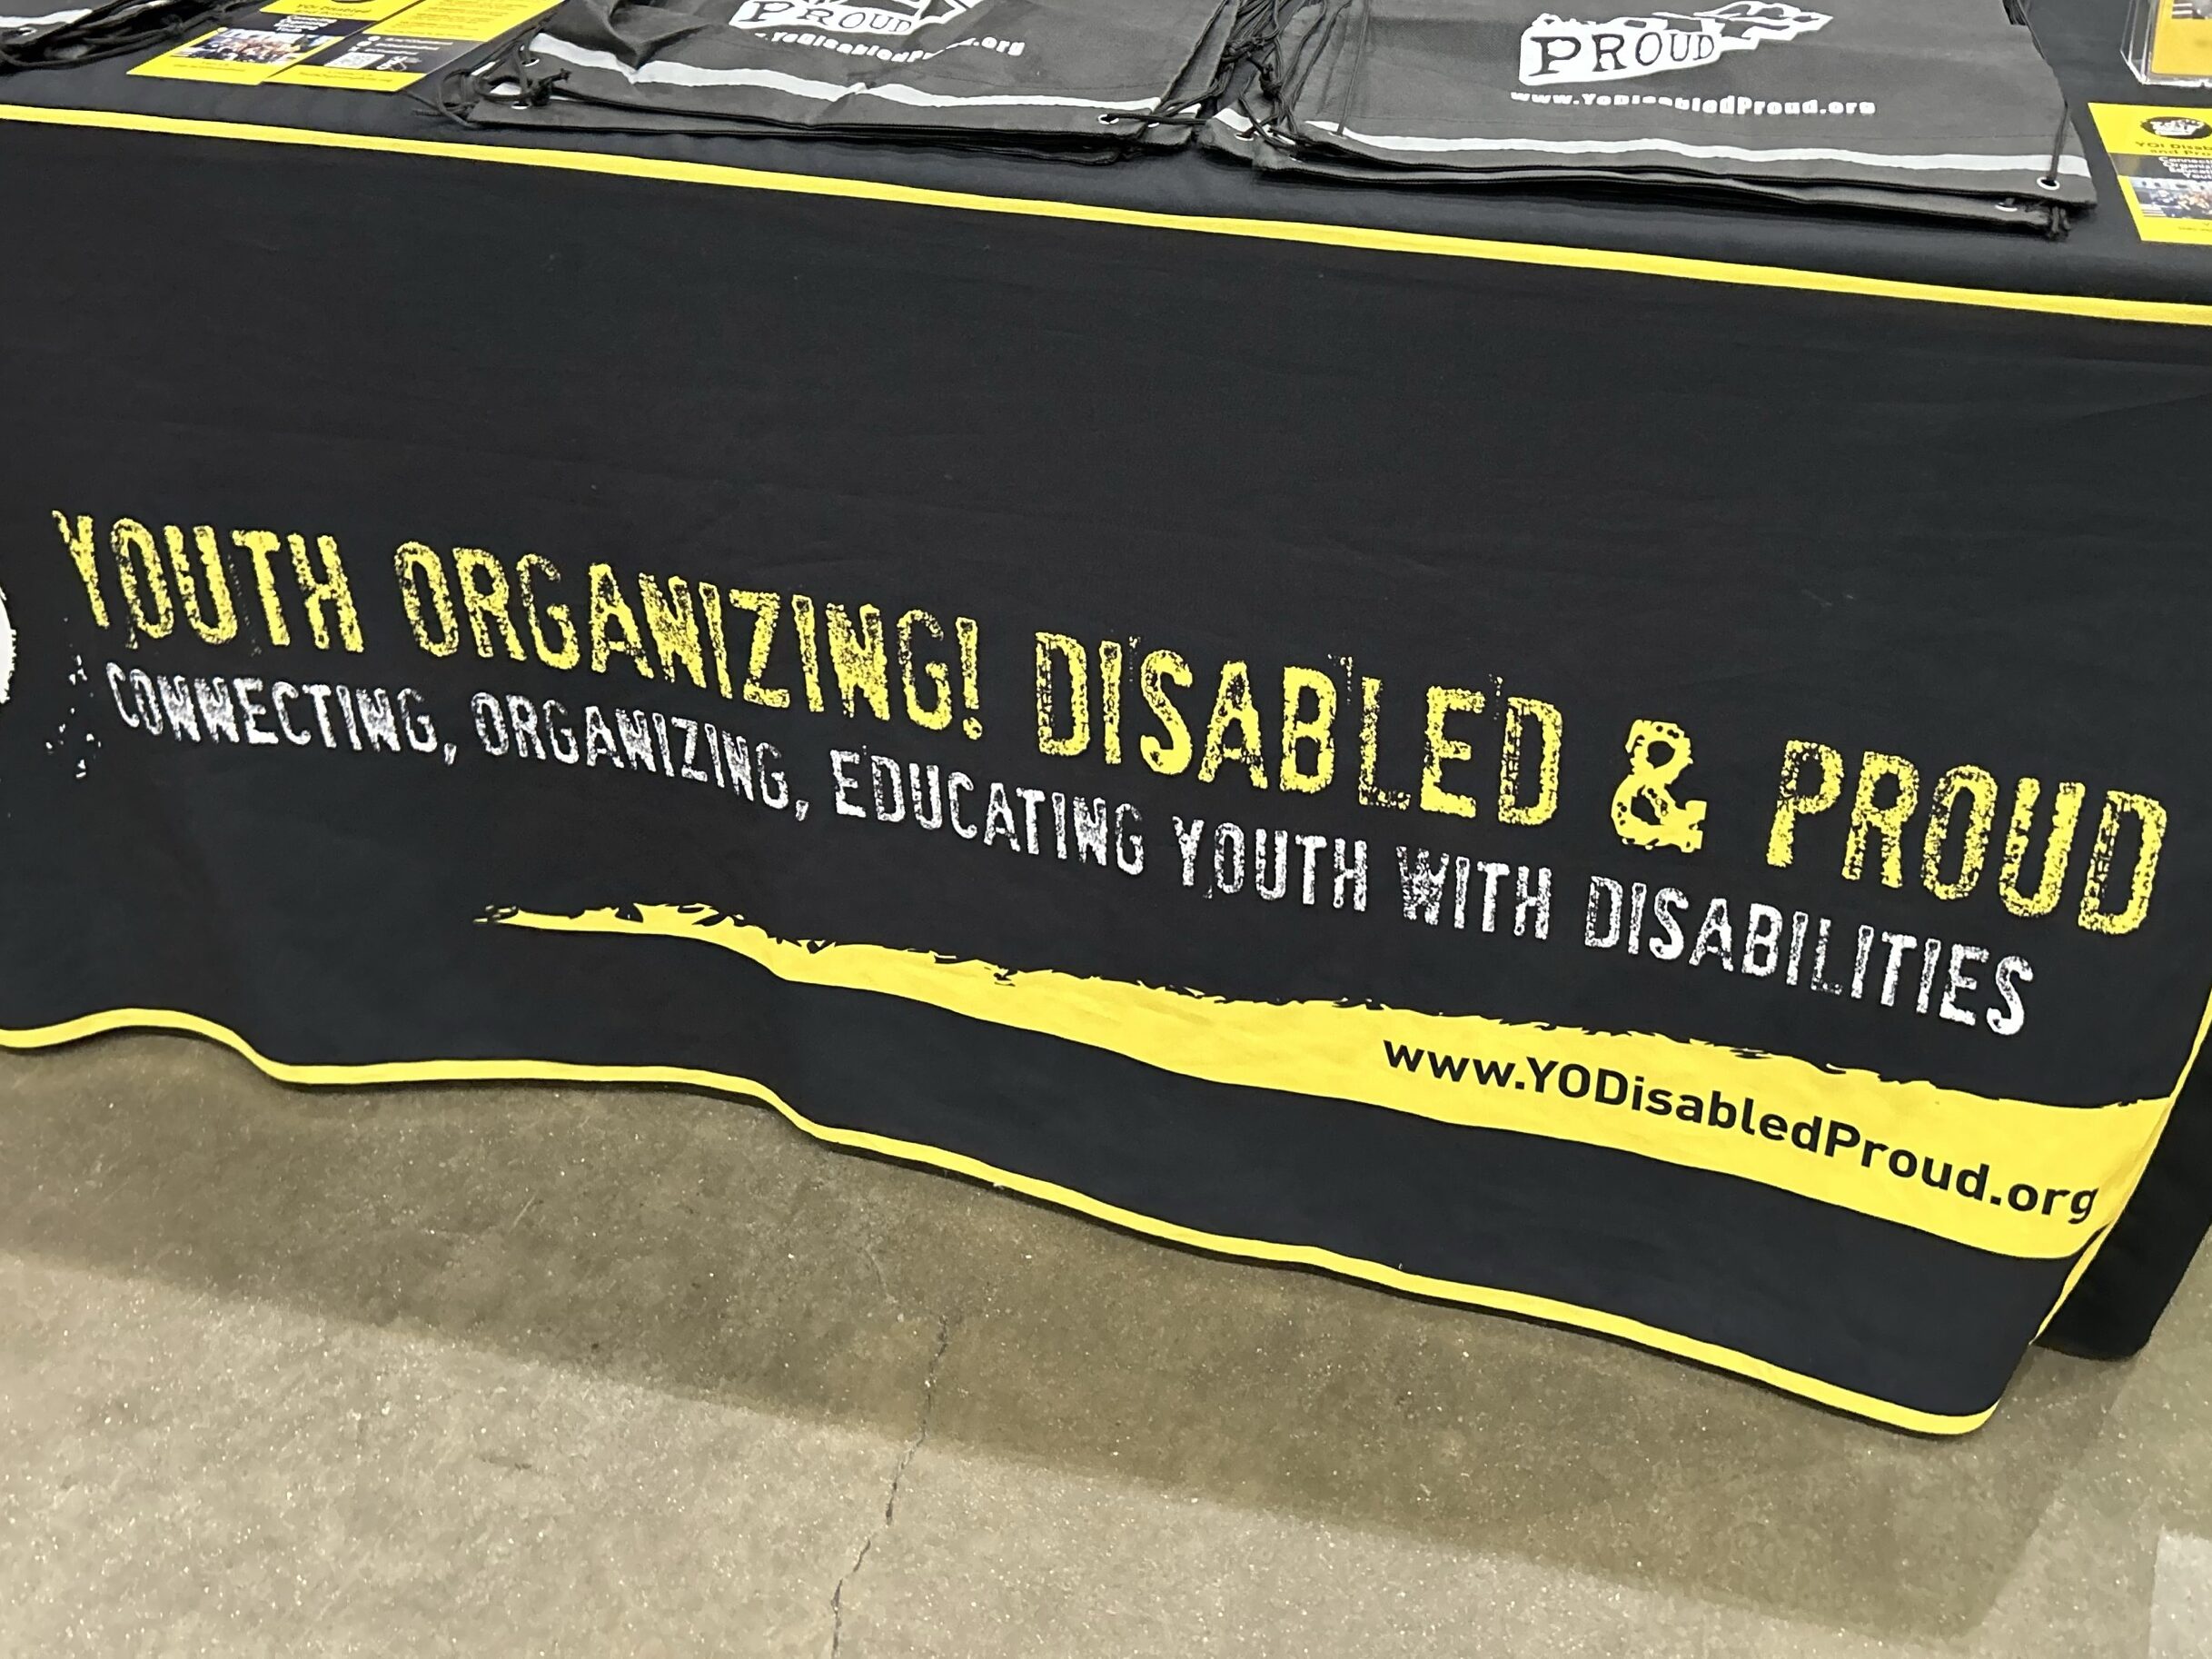 A table with a black and yellow table cloth displays black bags yellow flyers. The words "Youth Organizing! Disabled & Proud Connecting, Organizing Educating Youth with Disabilities
www.YODisabledProud.org"
are across the front of the table cloth.